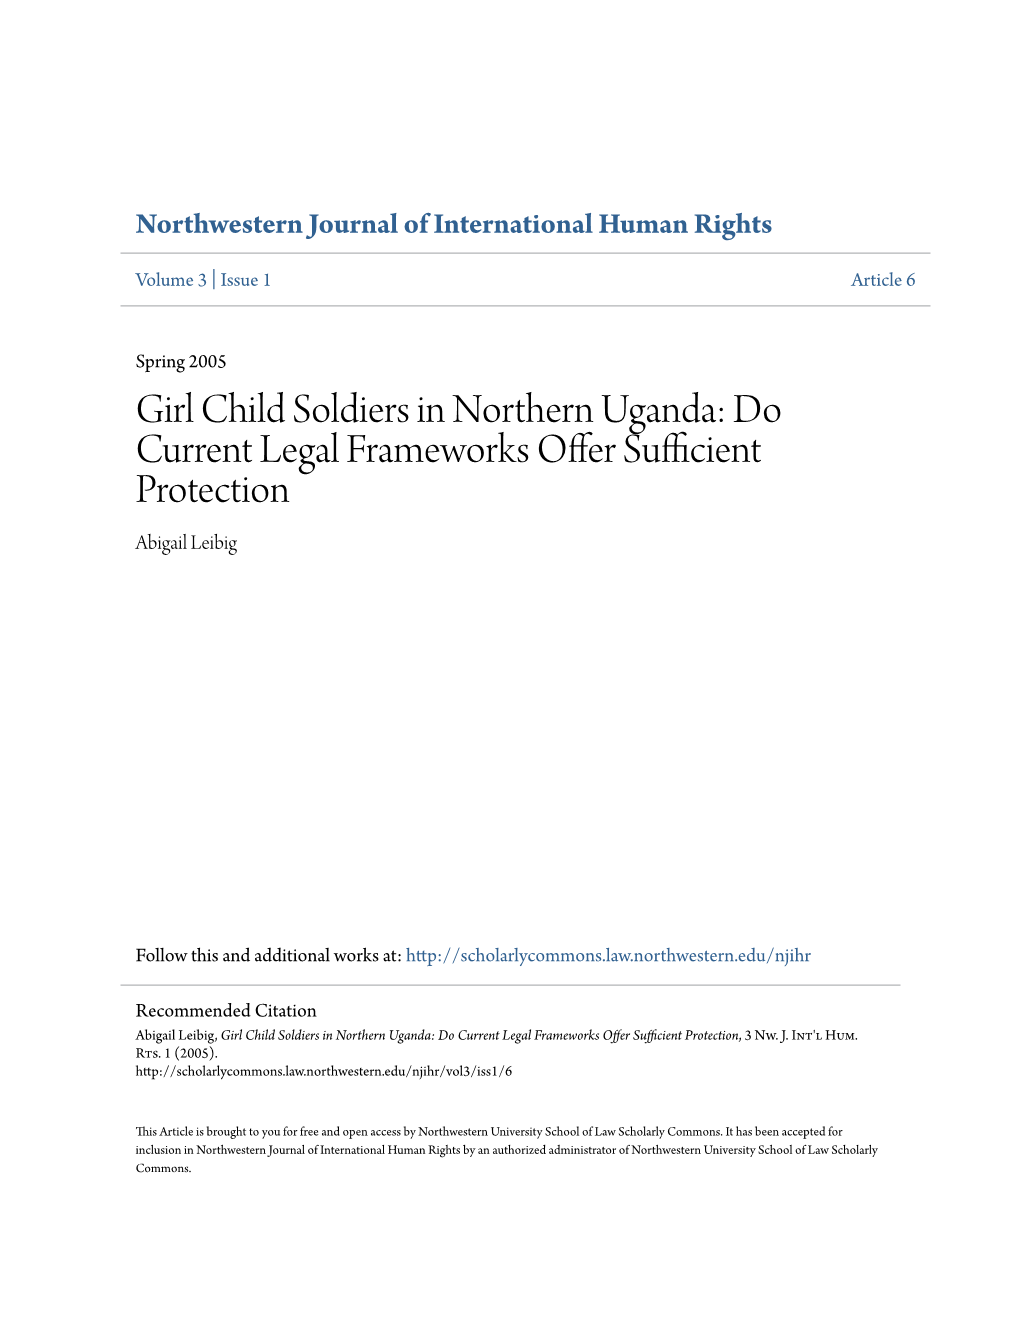 Girl Child Soldiers in Northern Uganda: Do Current Legal Frameworks Offer Sufficient Protection Abigail Leibig